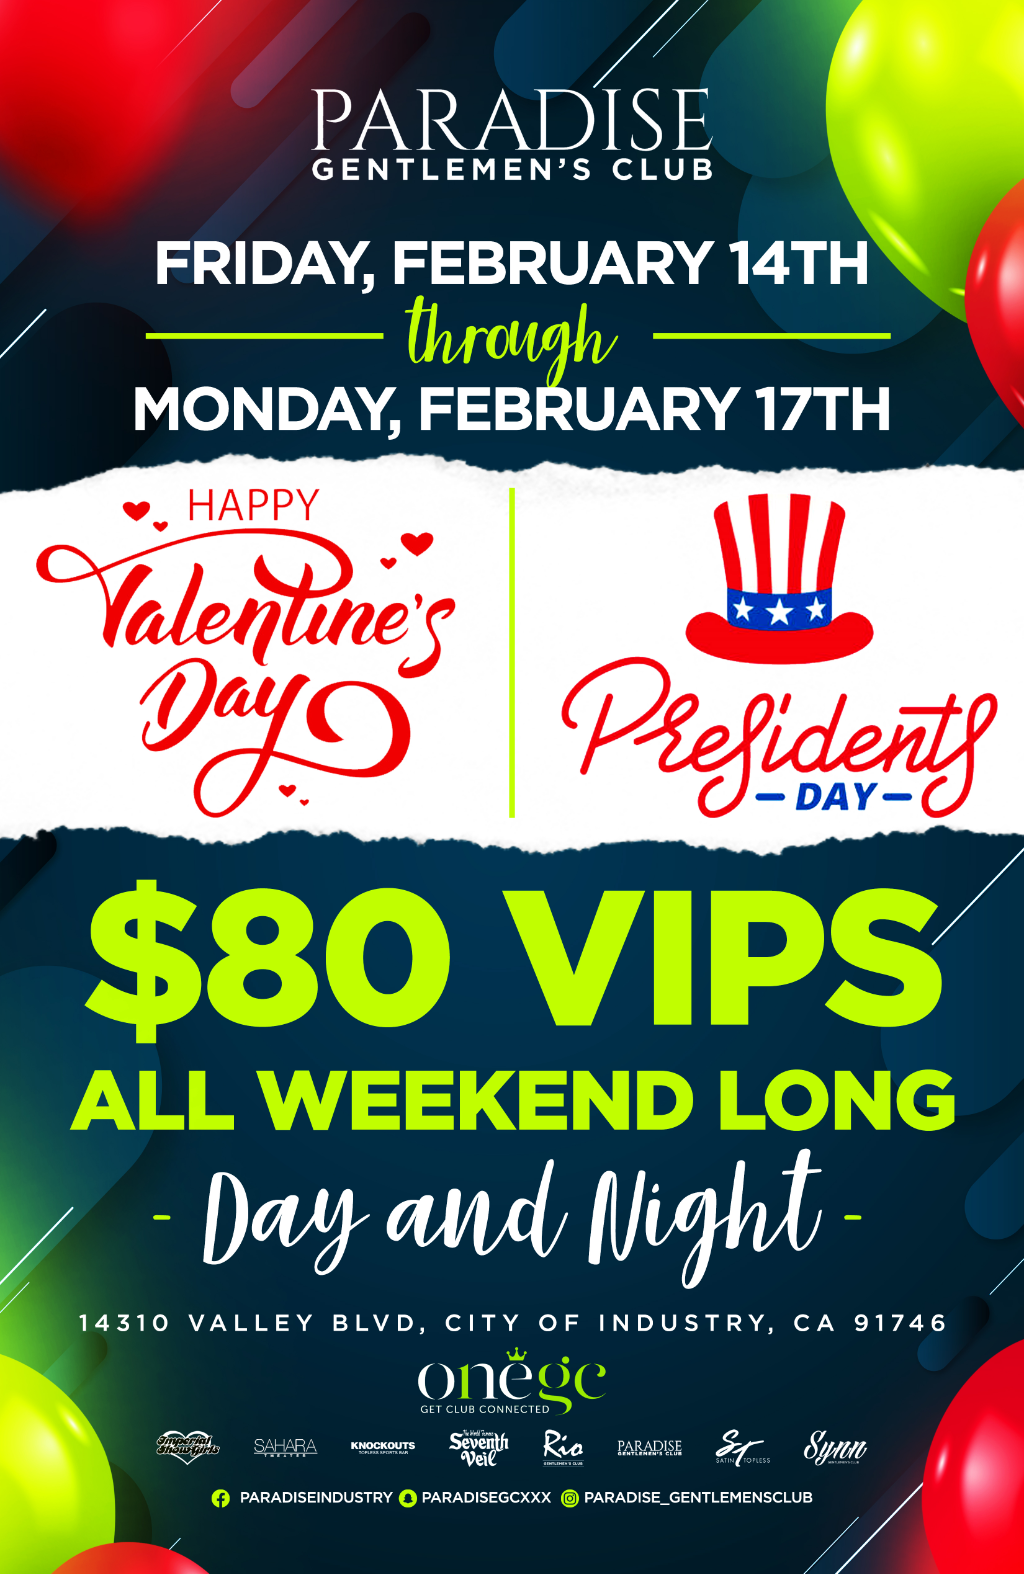 VALENTINS DAY + PRESIDENTS DAY LONG WEEKEND SPECIAL